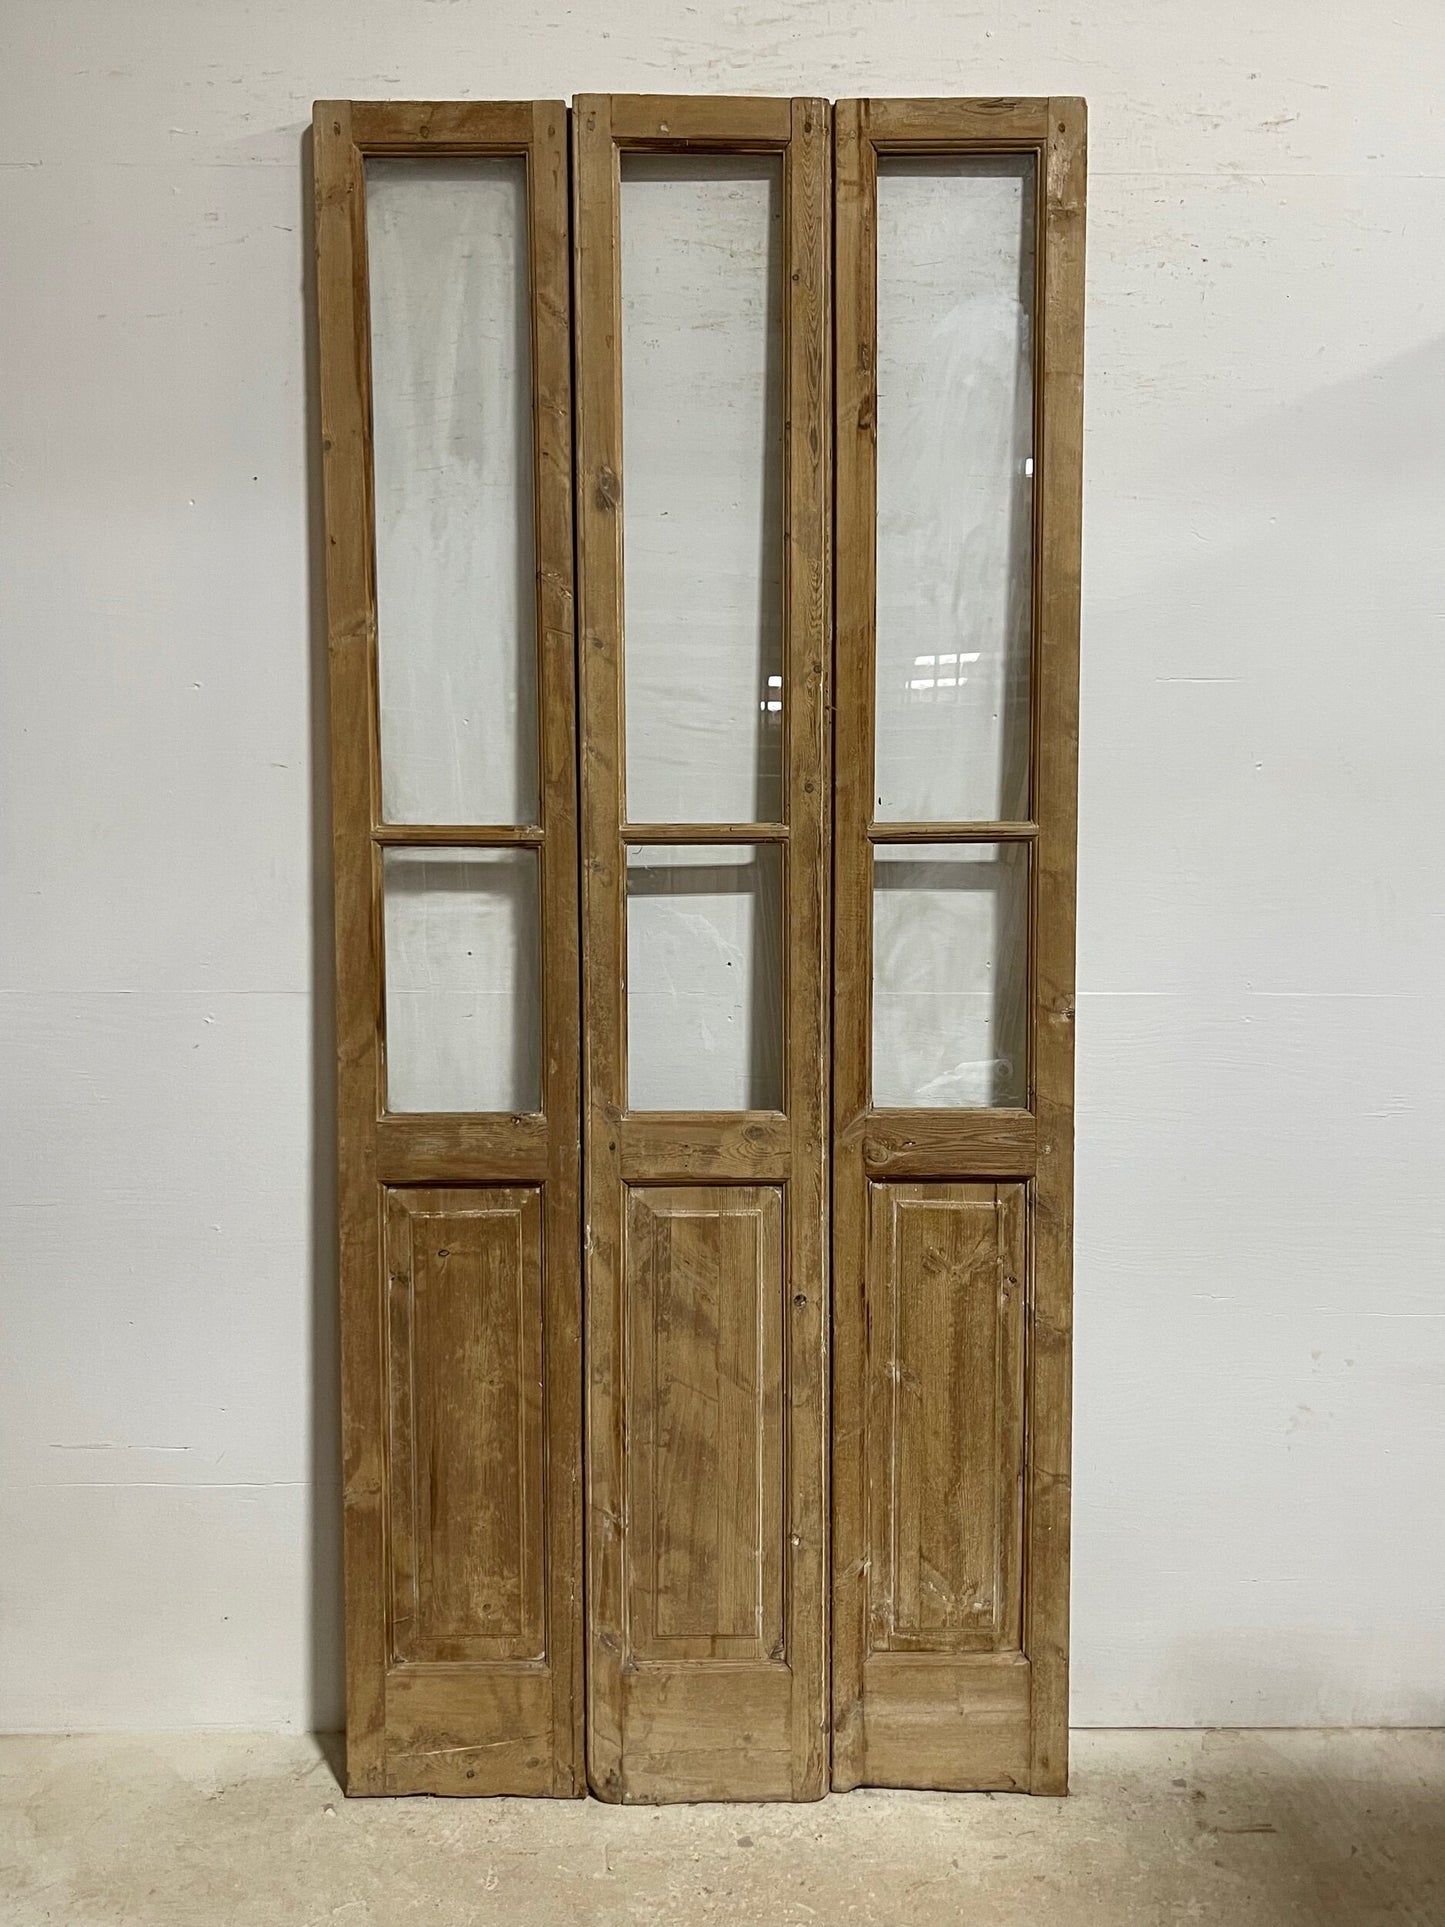 Antique French doors with glass (99.25x43.75) H0244s